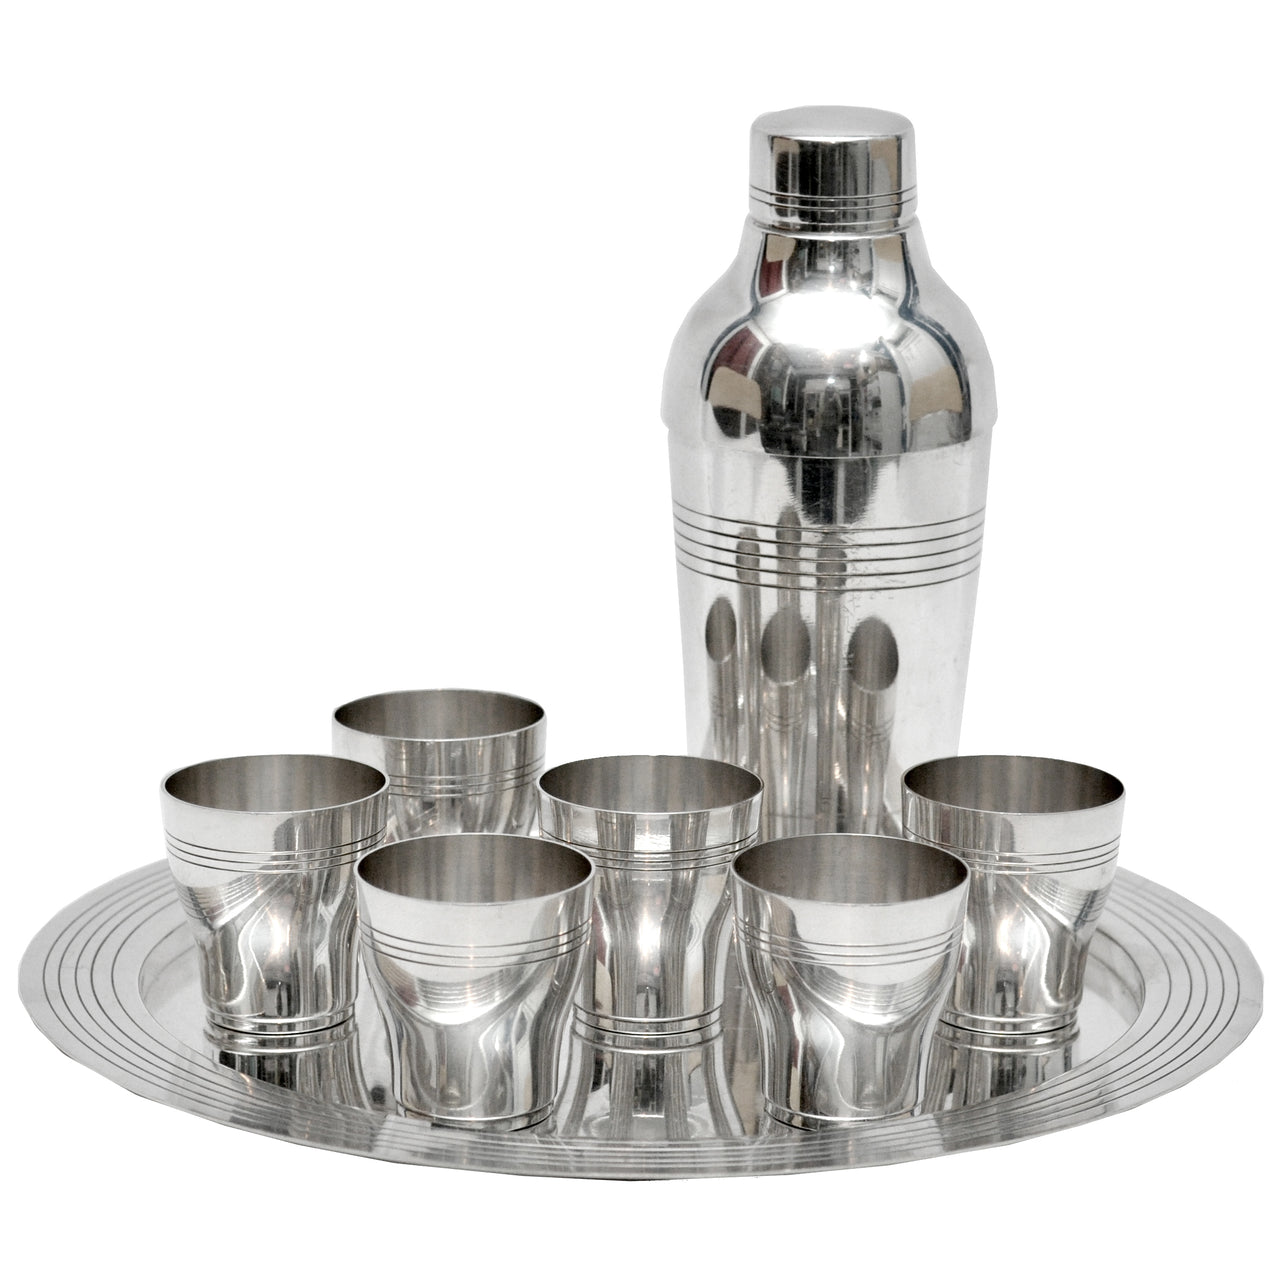 Classic Cocktail Shaker Set - Stainless Steel - Wood - Silver - Black - 10  Pieces from Apollo Box